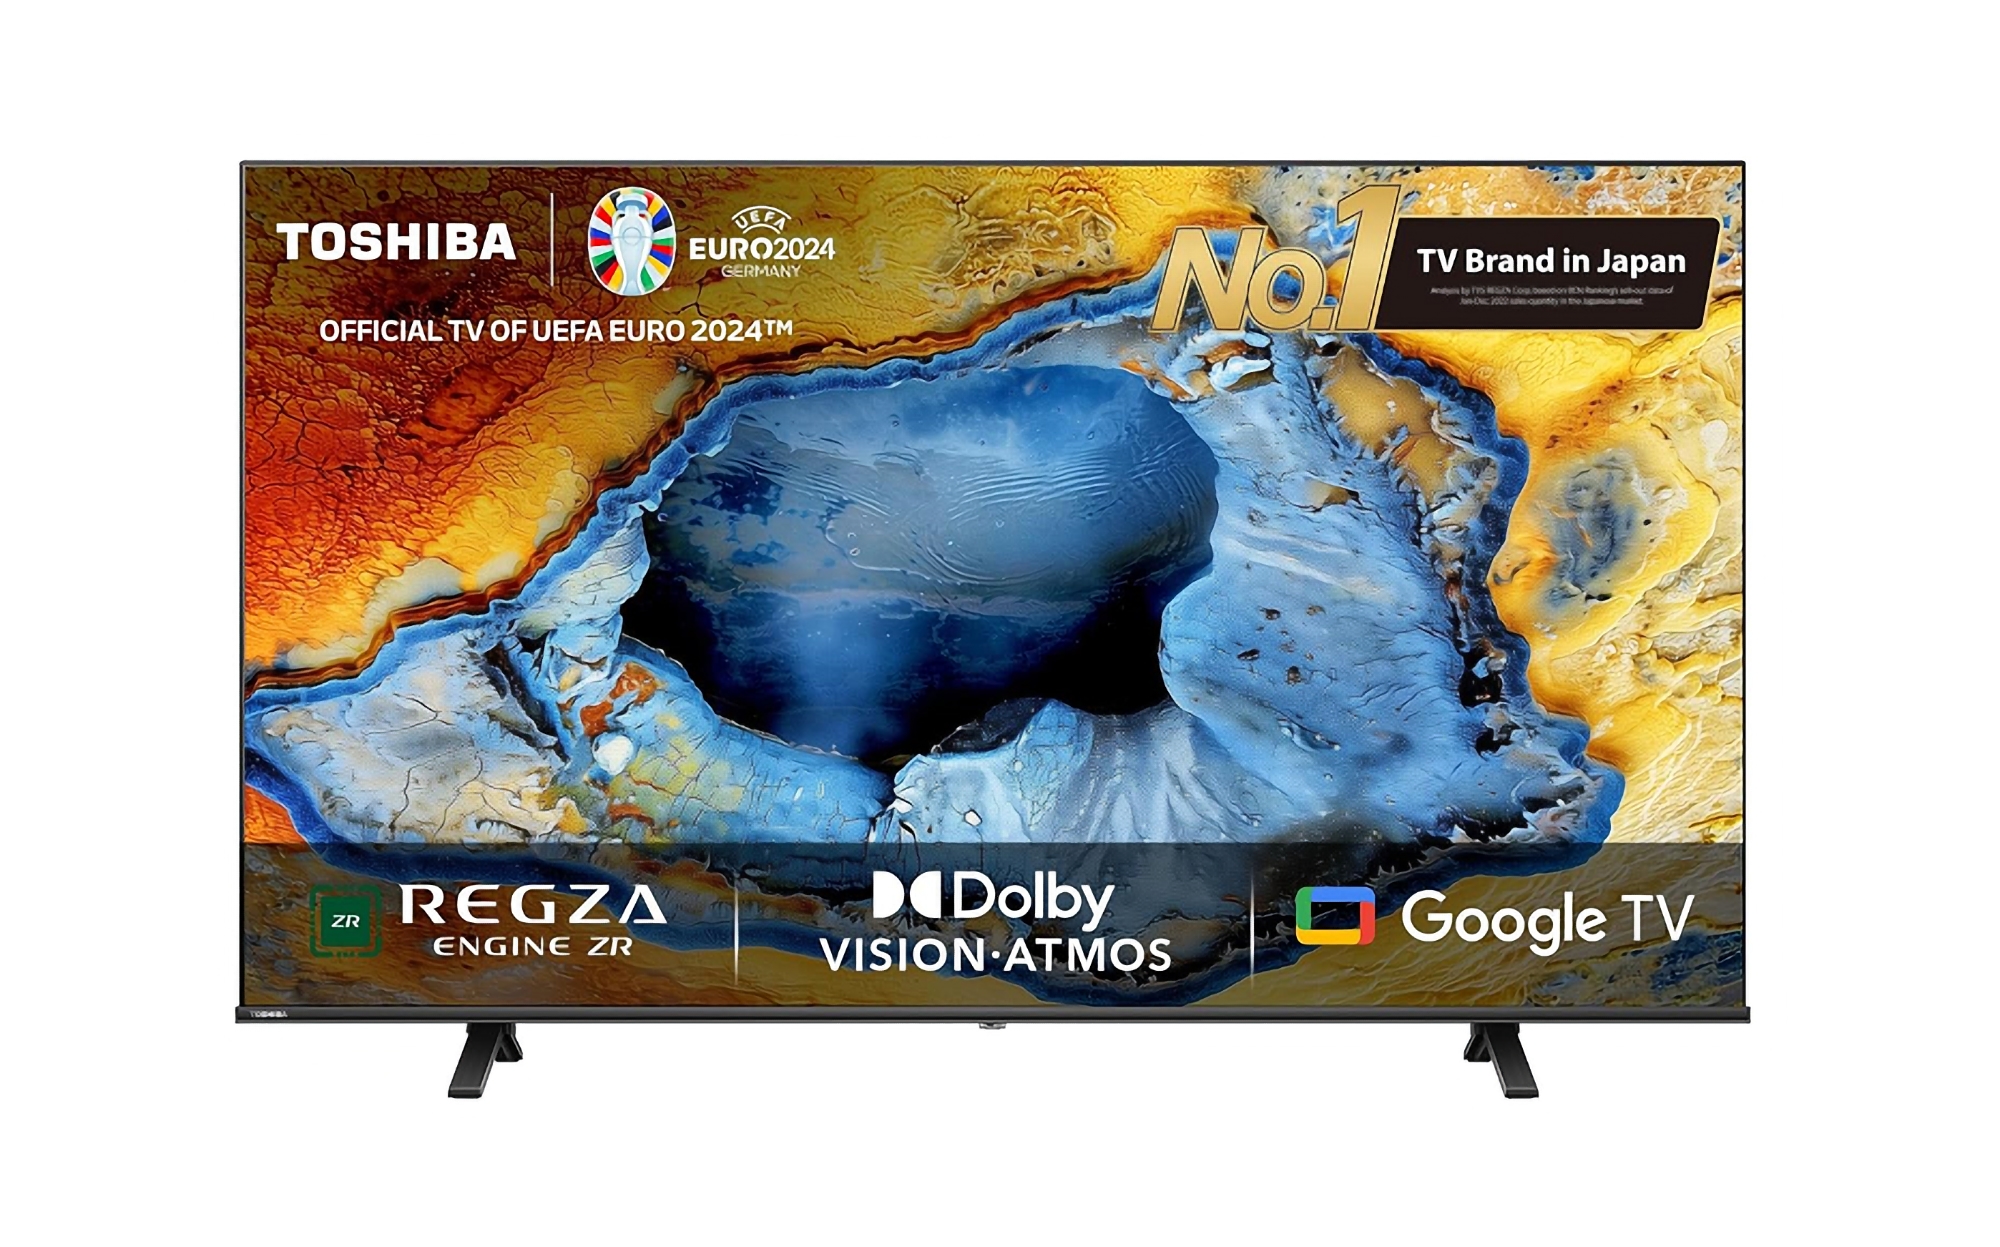 Toshiba has unveiled the C350NP series of TVs with screens from 43 to 75 inches, 4K resolution and Google TV on board